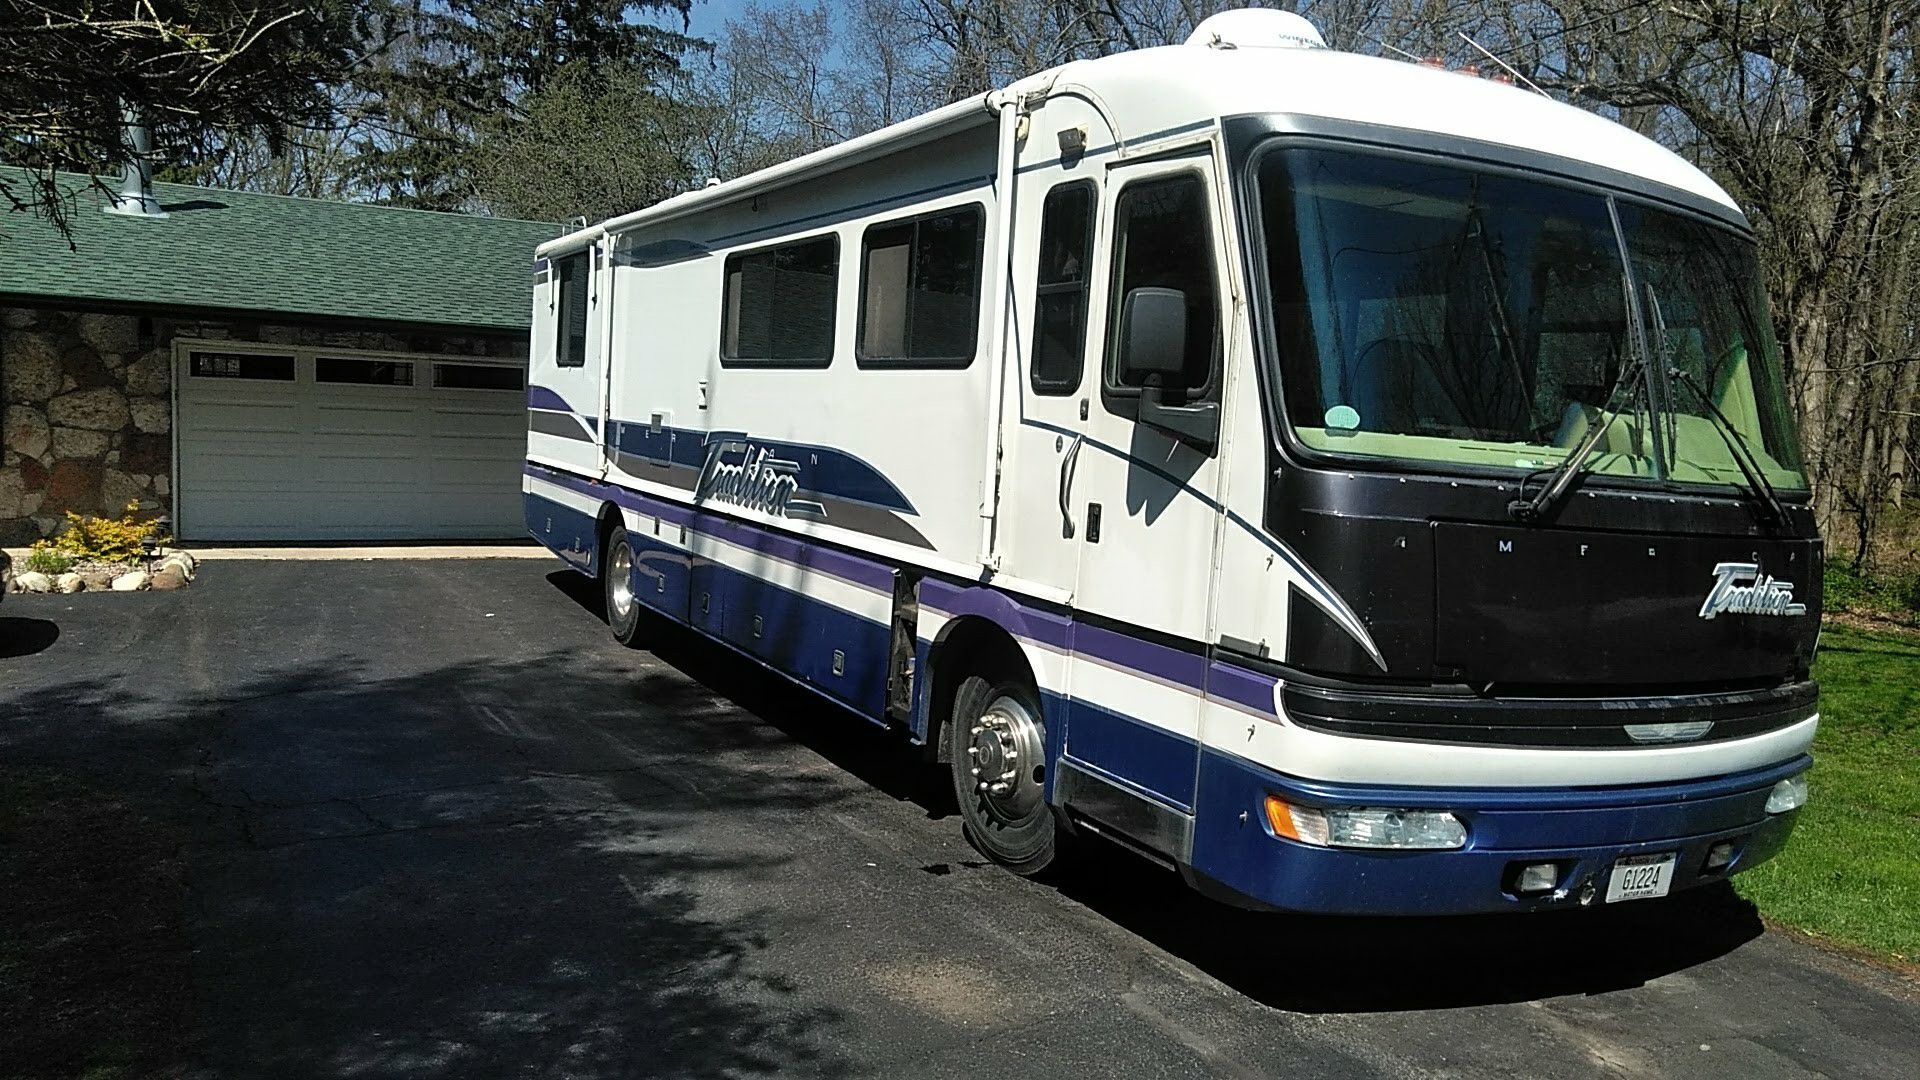 1996 Spartan American traditions motorhome with only 13,000 miles